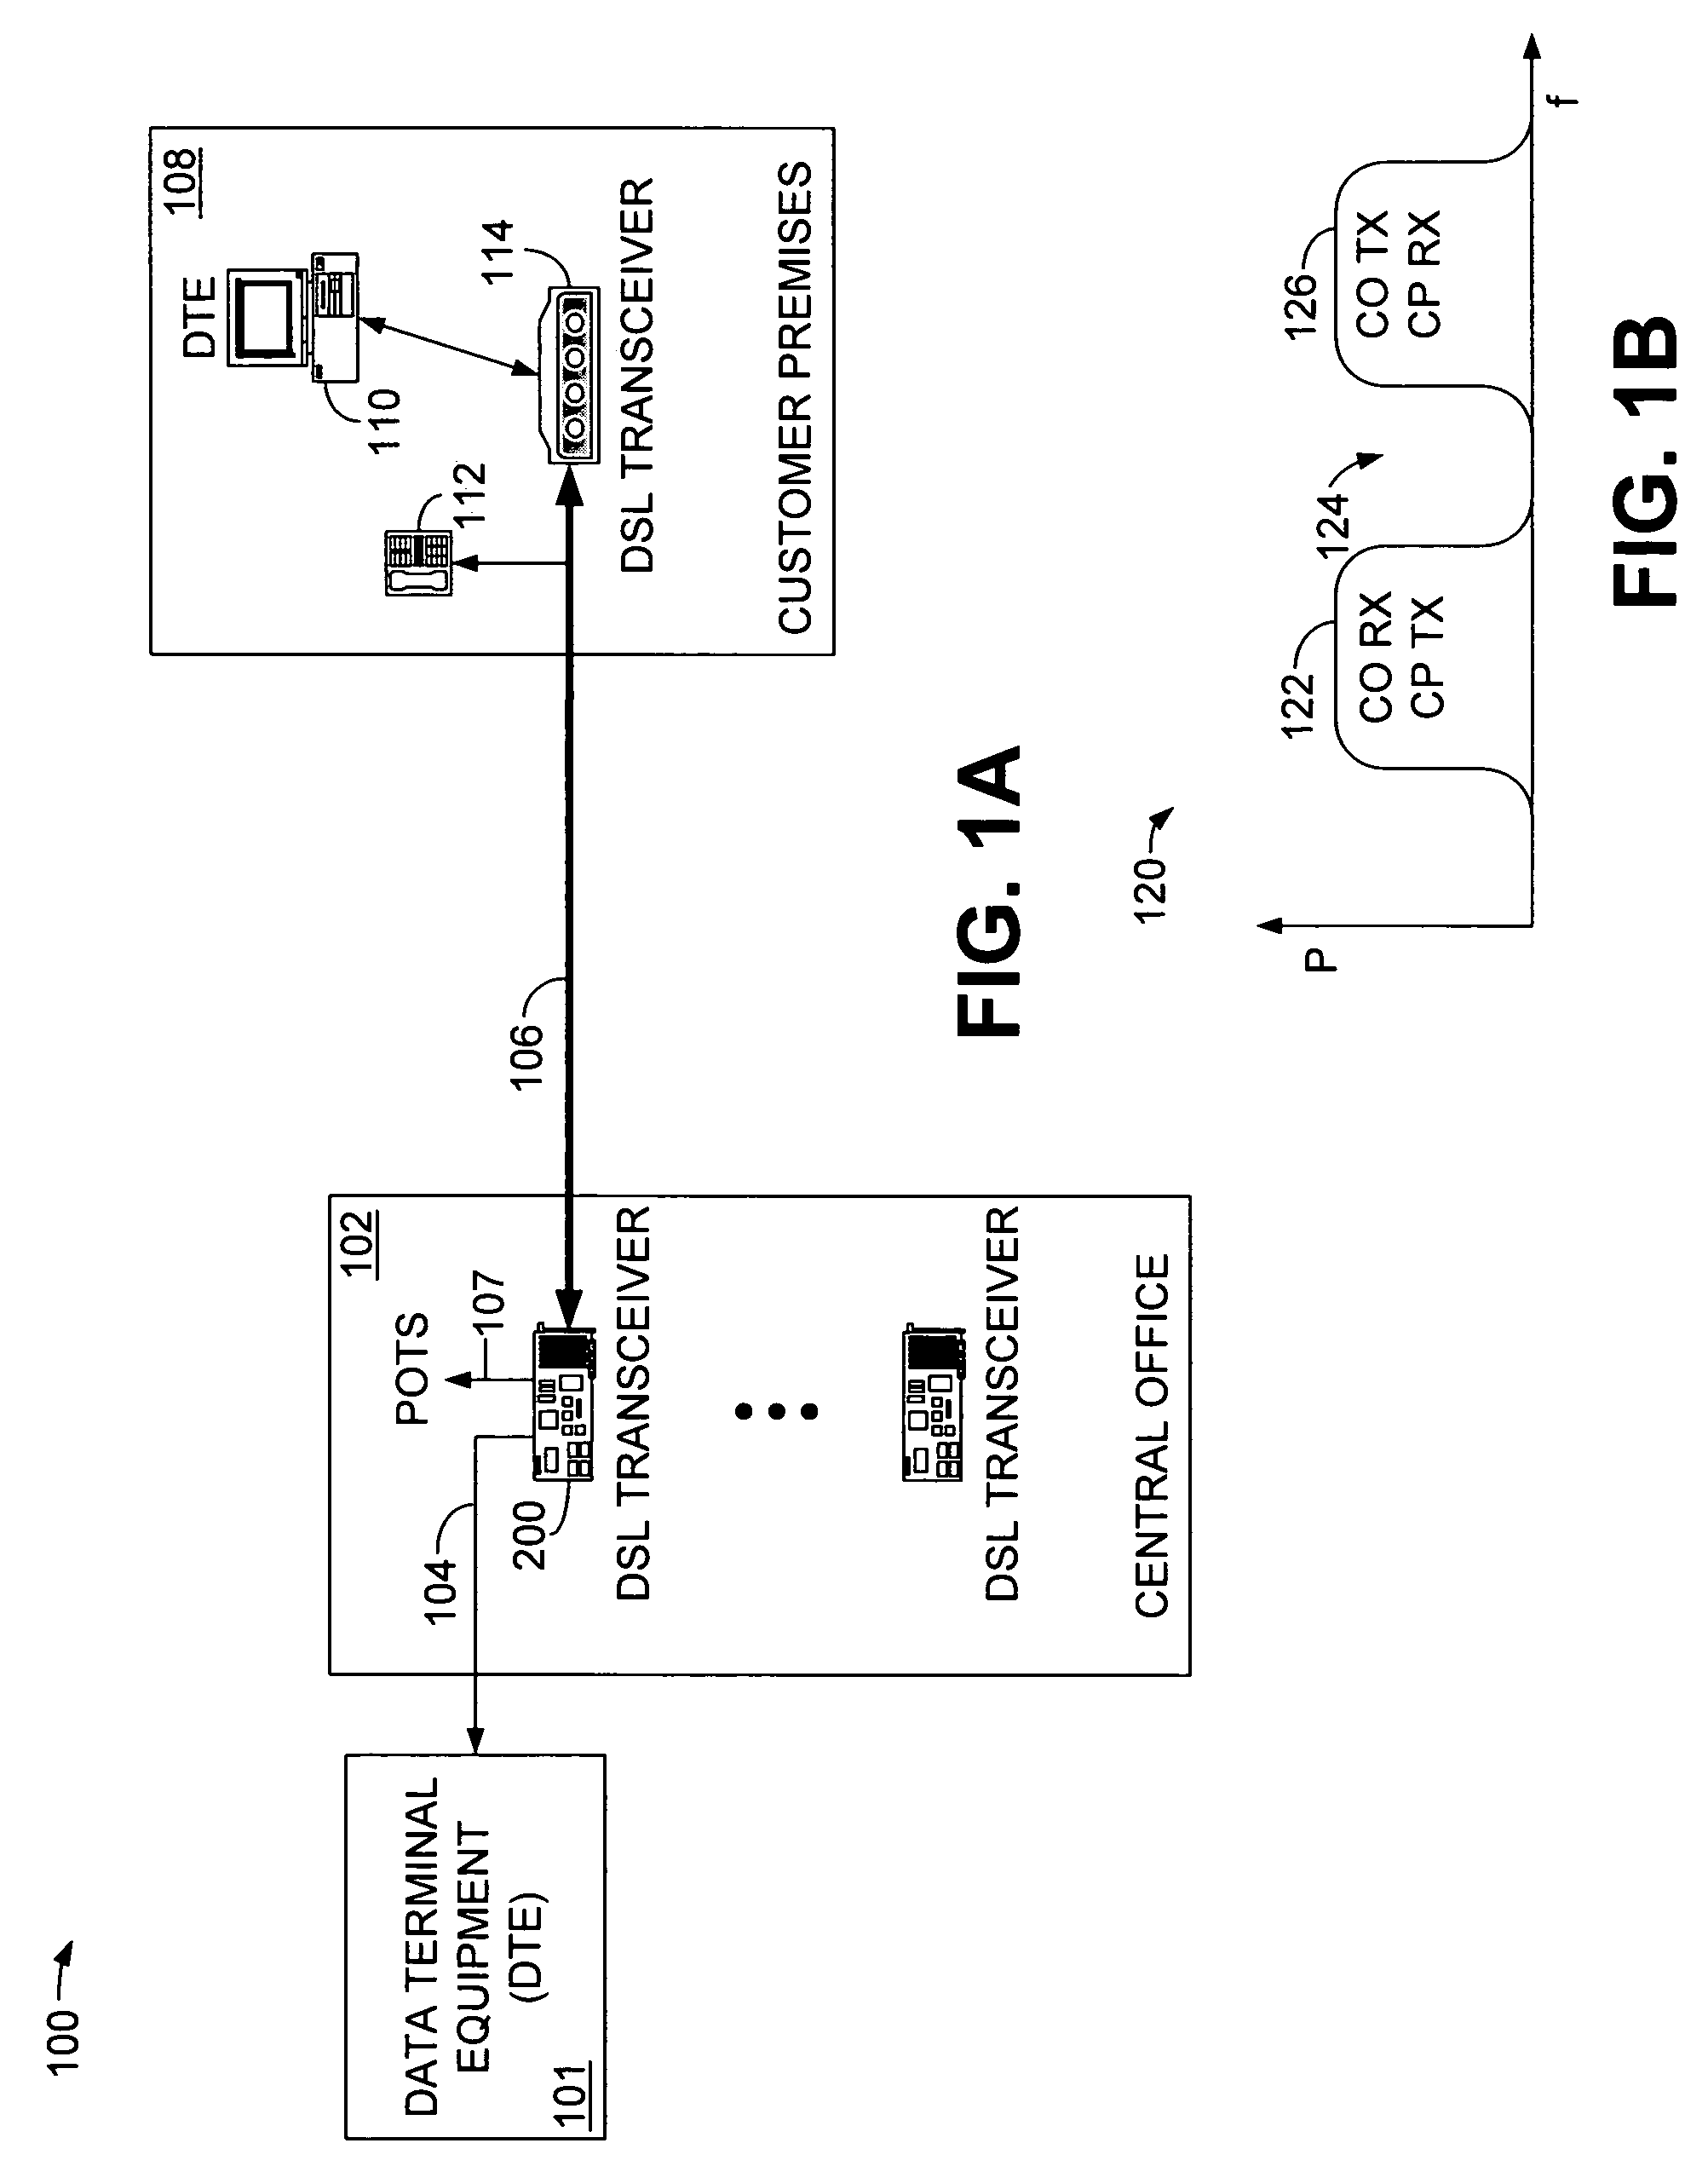 Fractional bit rate encoding in a discrete multi-tone communication system